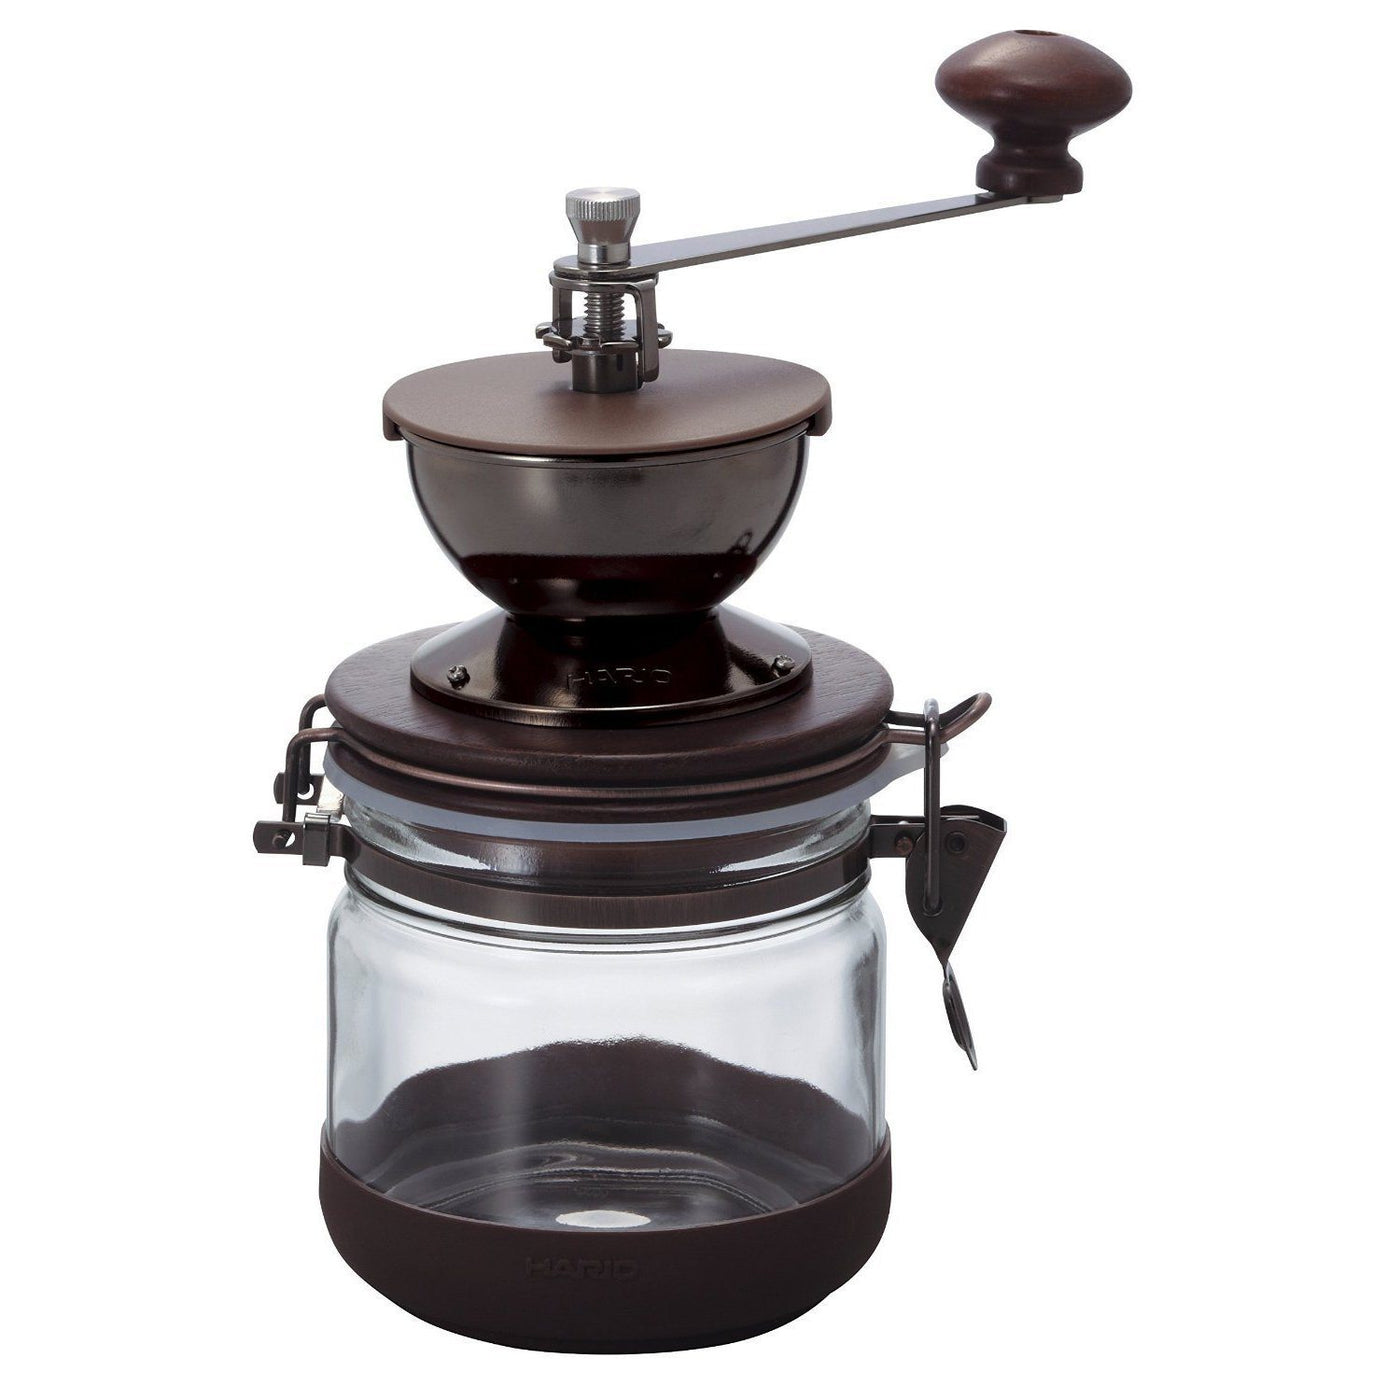 CRYS* Coffee Grinder, Manual Coffee Mill